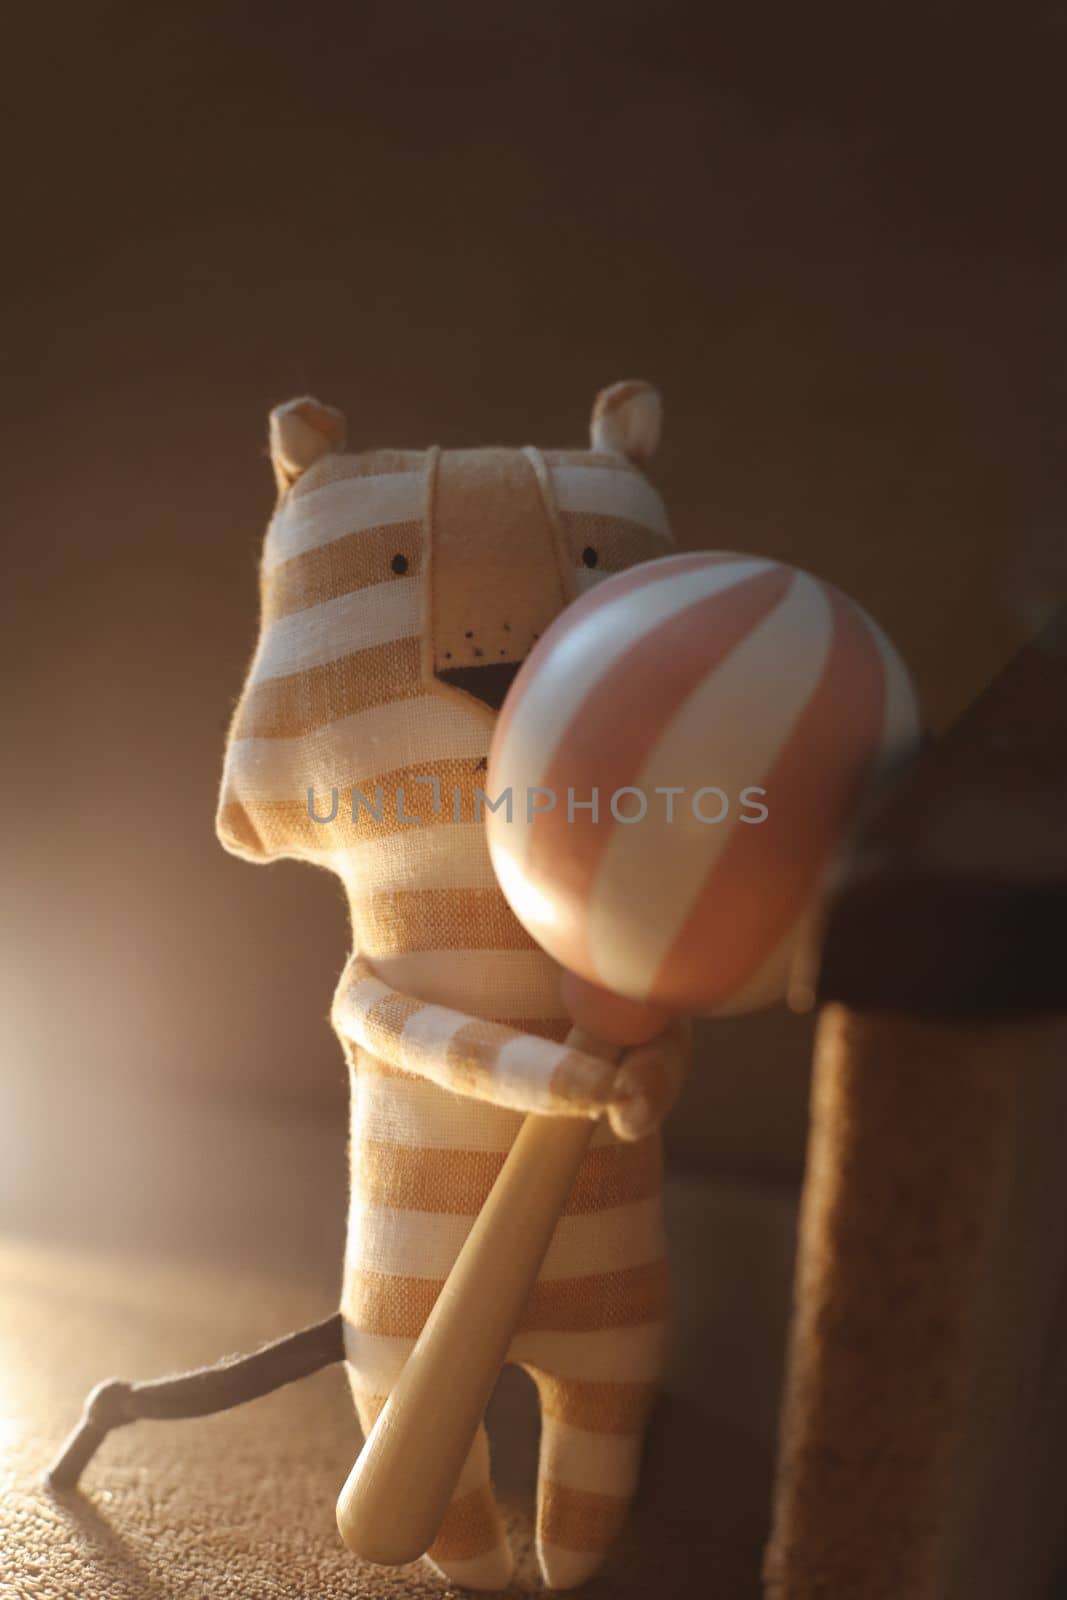 Toys made of natural materials. Tiger plush toy on cozy background. Non-plastic, eco-friendly, handmade toys for children